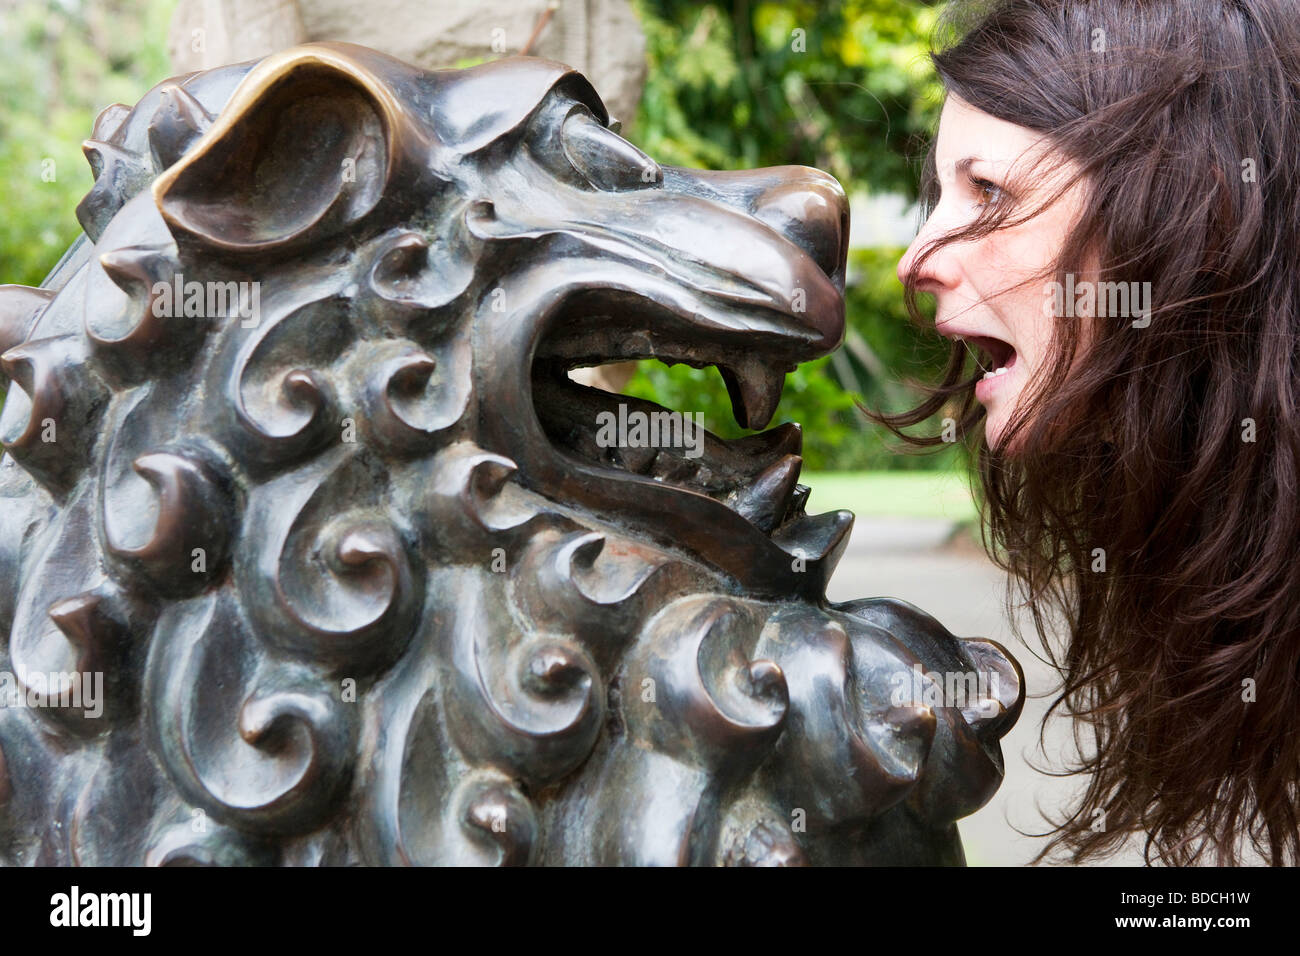 Portrait of a young woman looking at a metal sculpture of a lion in Sydney's Botanic Gardens, Australia Stock Photo